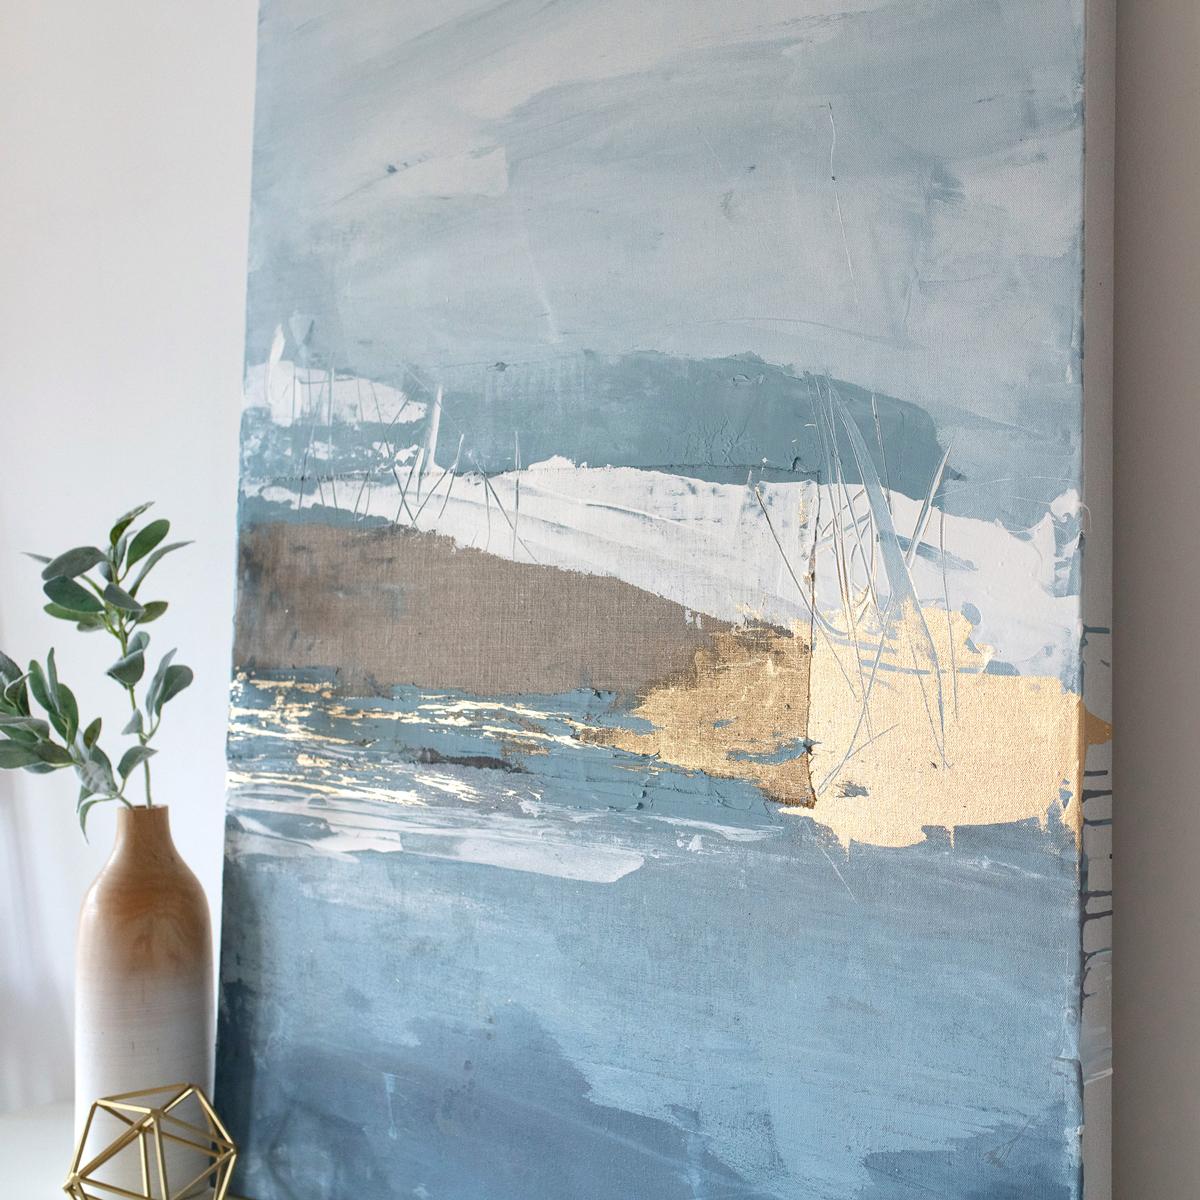 This abstract painting is made using mixed media including linen and gold. It features a cool blue and white palette, with large, expressive strokes layered over textured linen, with metallic gold adding a contrasting accent to the composition,. The